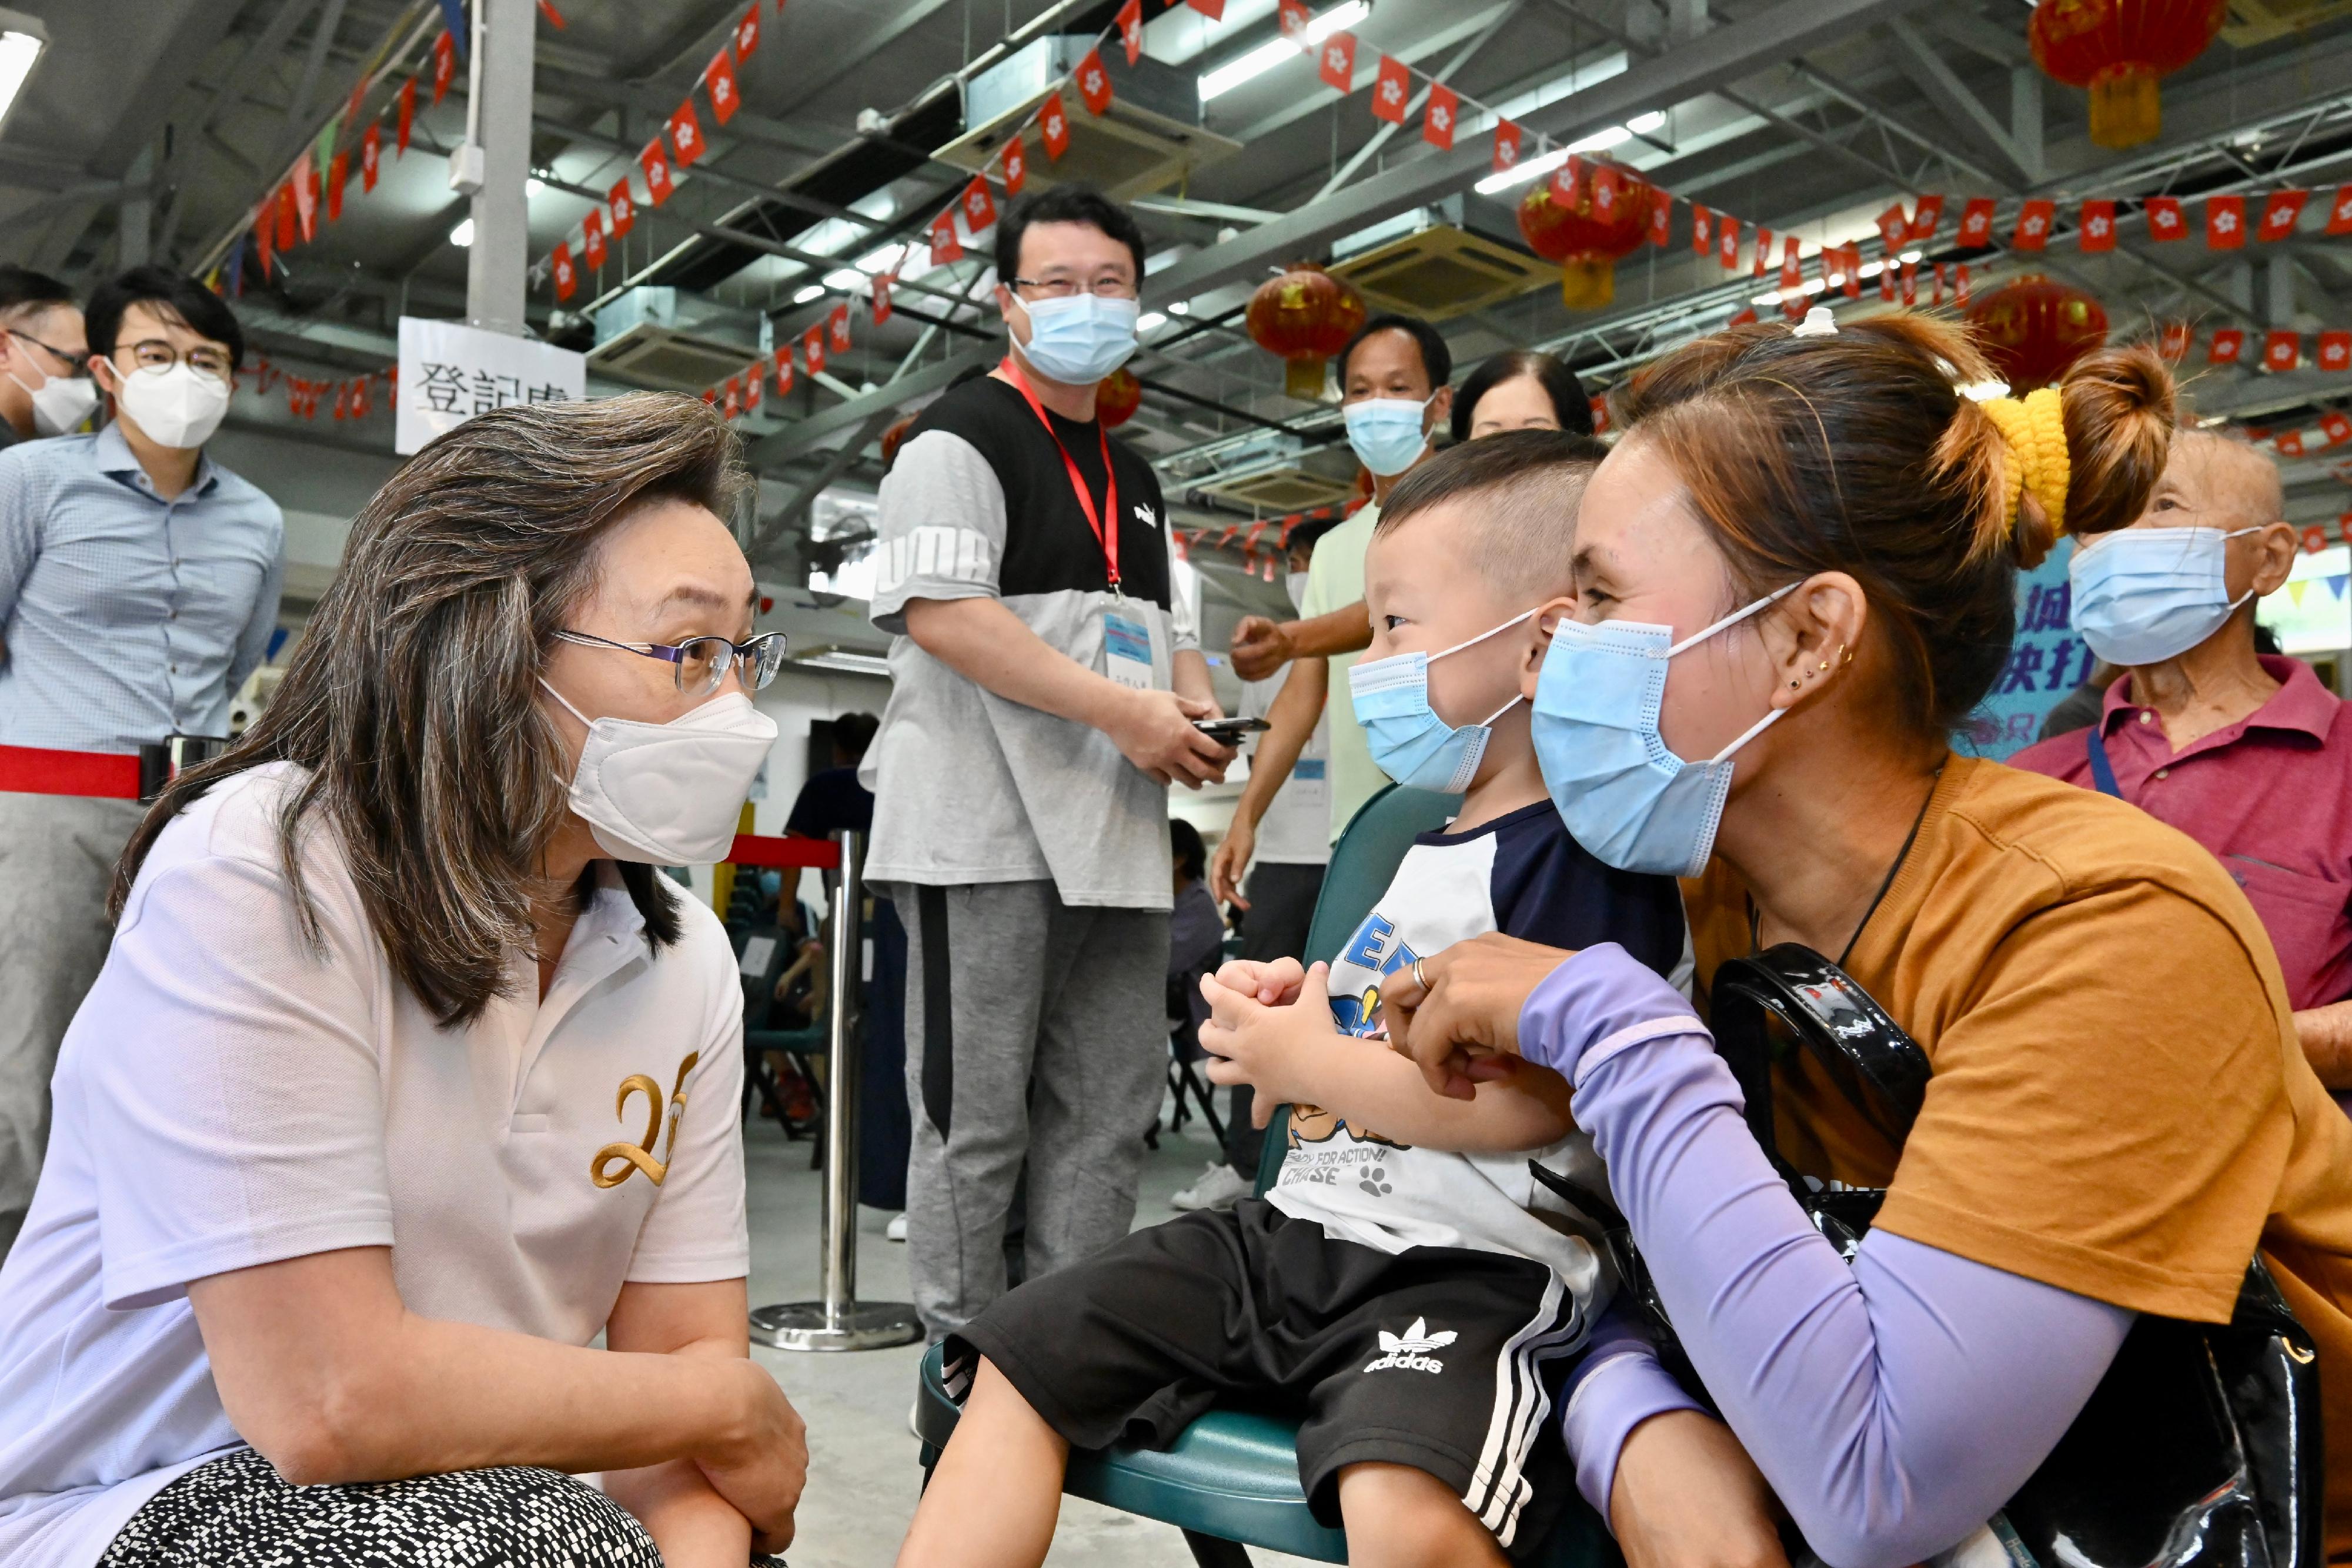 The Secretary for the Civil Service, Mrs Ingrid Yeung, today (August 20) led an outreach COVID-19 vaccination team to Mui Wo Recreation Centre to provide the Sinovac vaccination service to more than 190 residents from Mui Wo and southern Lantau Island. Photo shows Mrs Yeung (left) giving encouragement to a child who is under 3 years old that would receive vaccination.